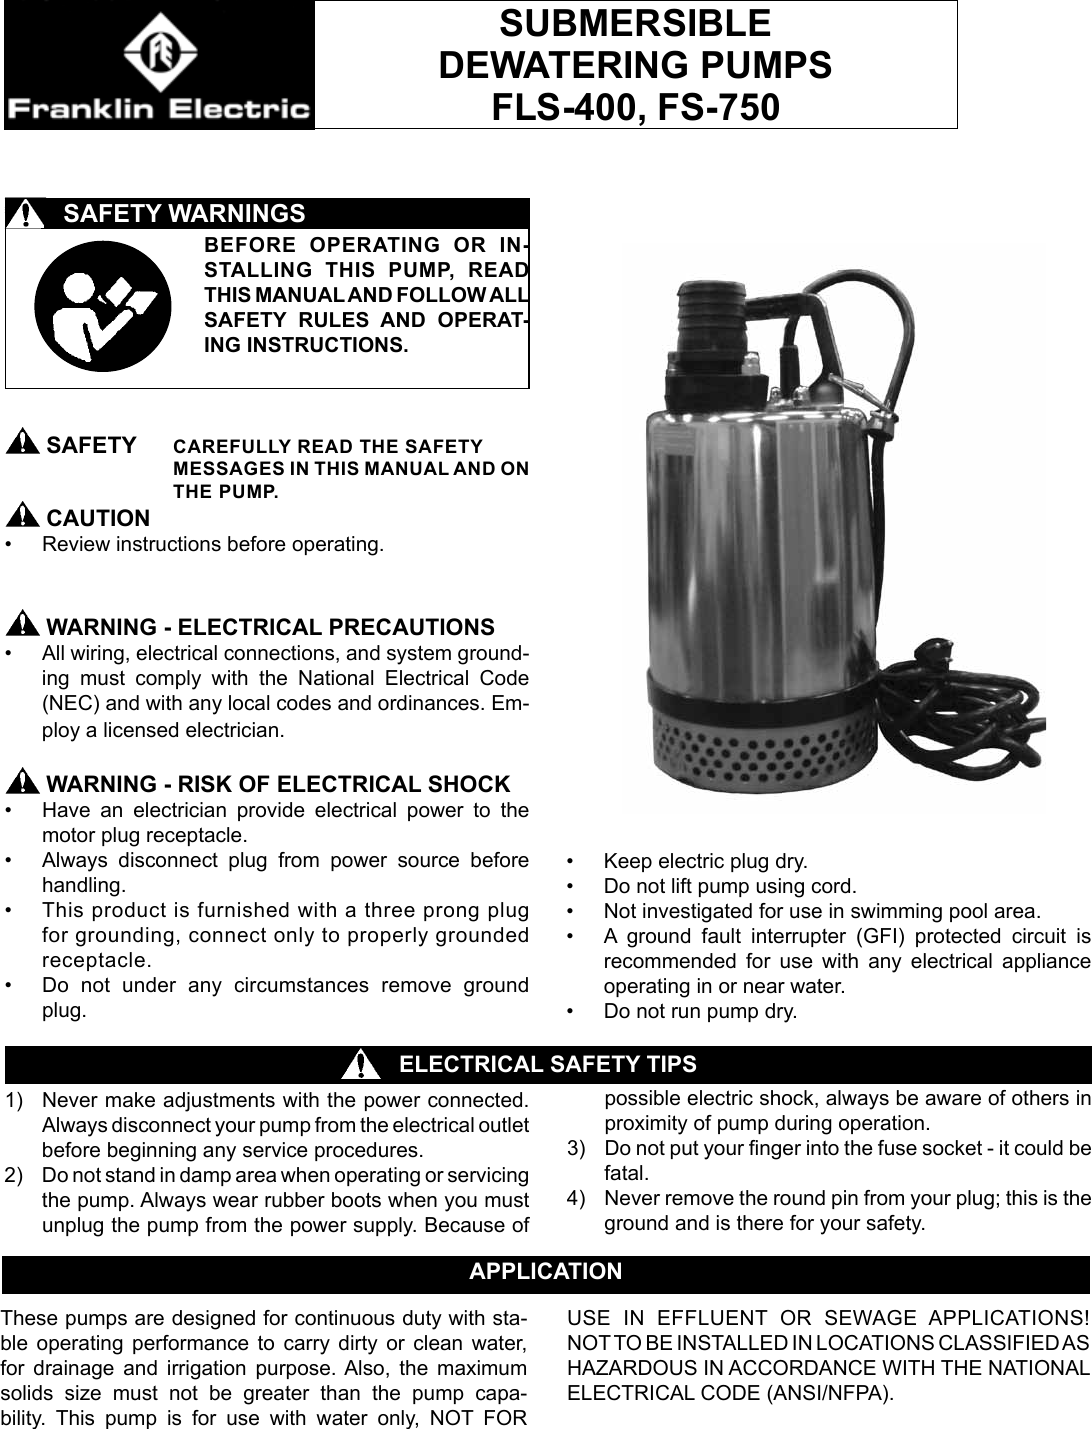 536808 2 Little Giant Fs 750 Submersible Utility Pump Manual User